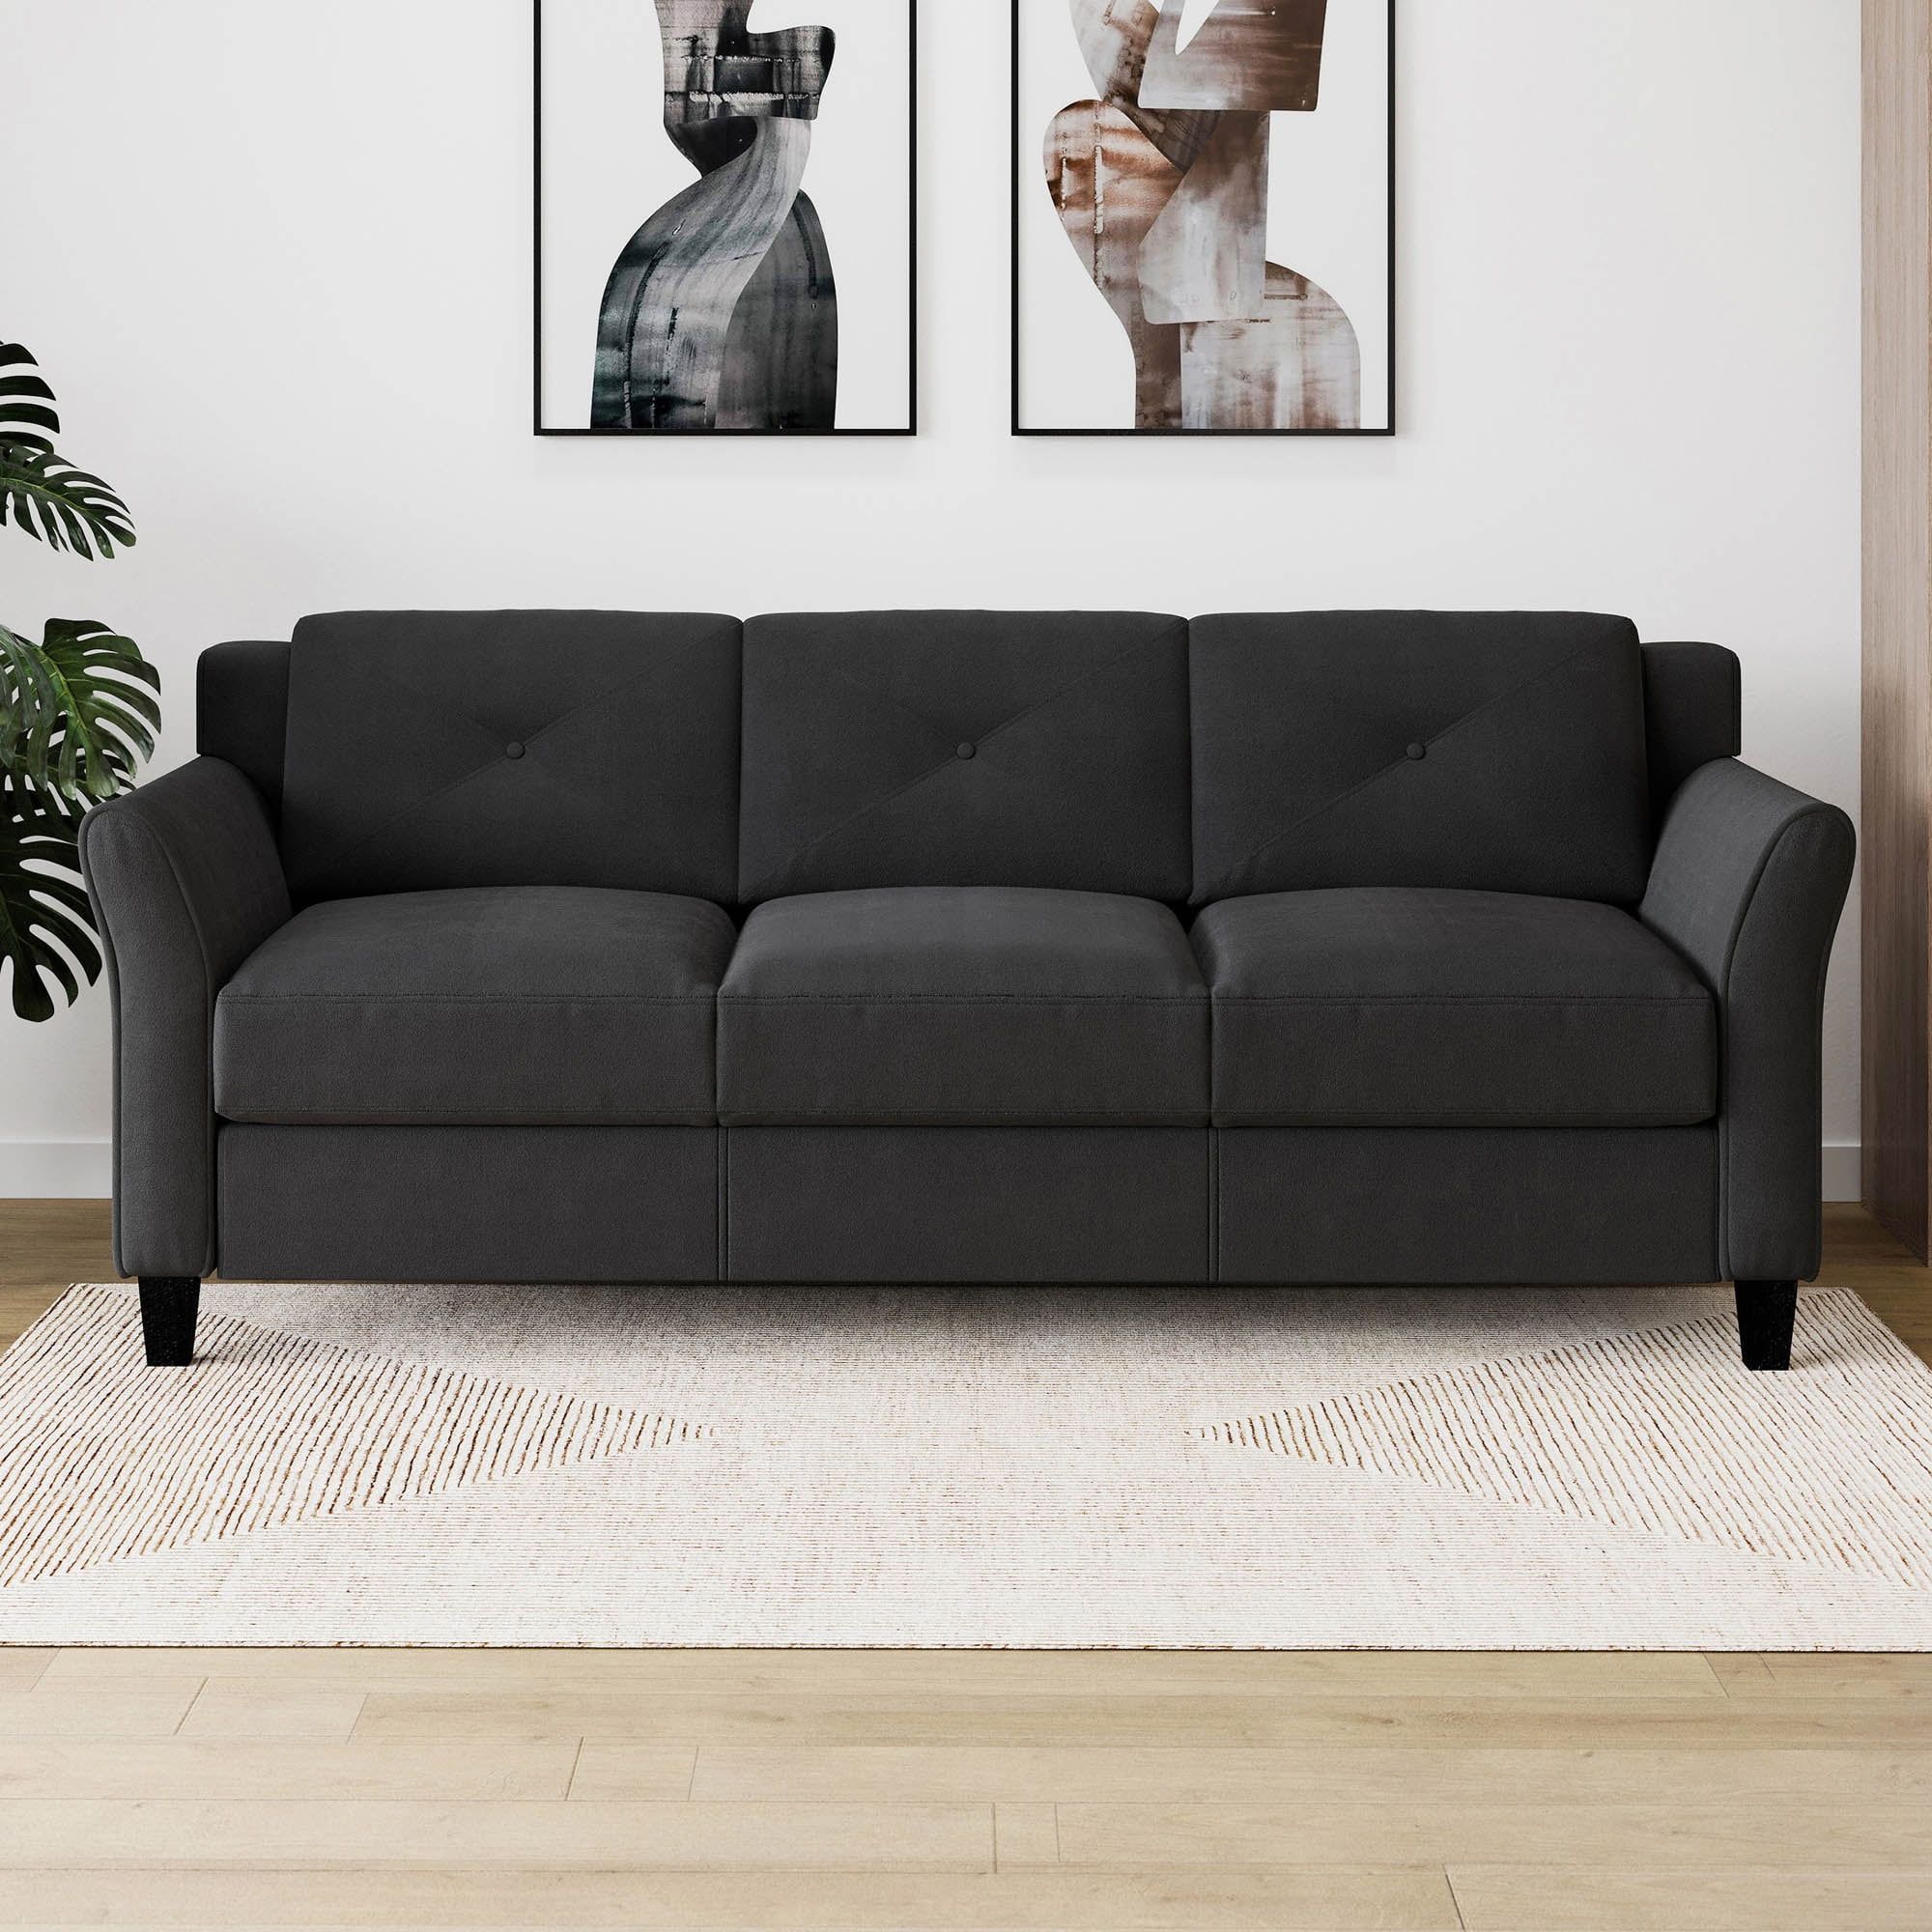 Lifestyle Solutions Taryn Traditional Sofa With Curved Arms, Black Fabric  Upholstery – Walmart Throughout Sofas With Curved Arms (Photo 8 of 15)